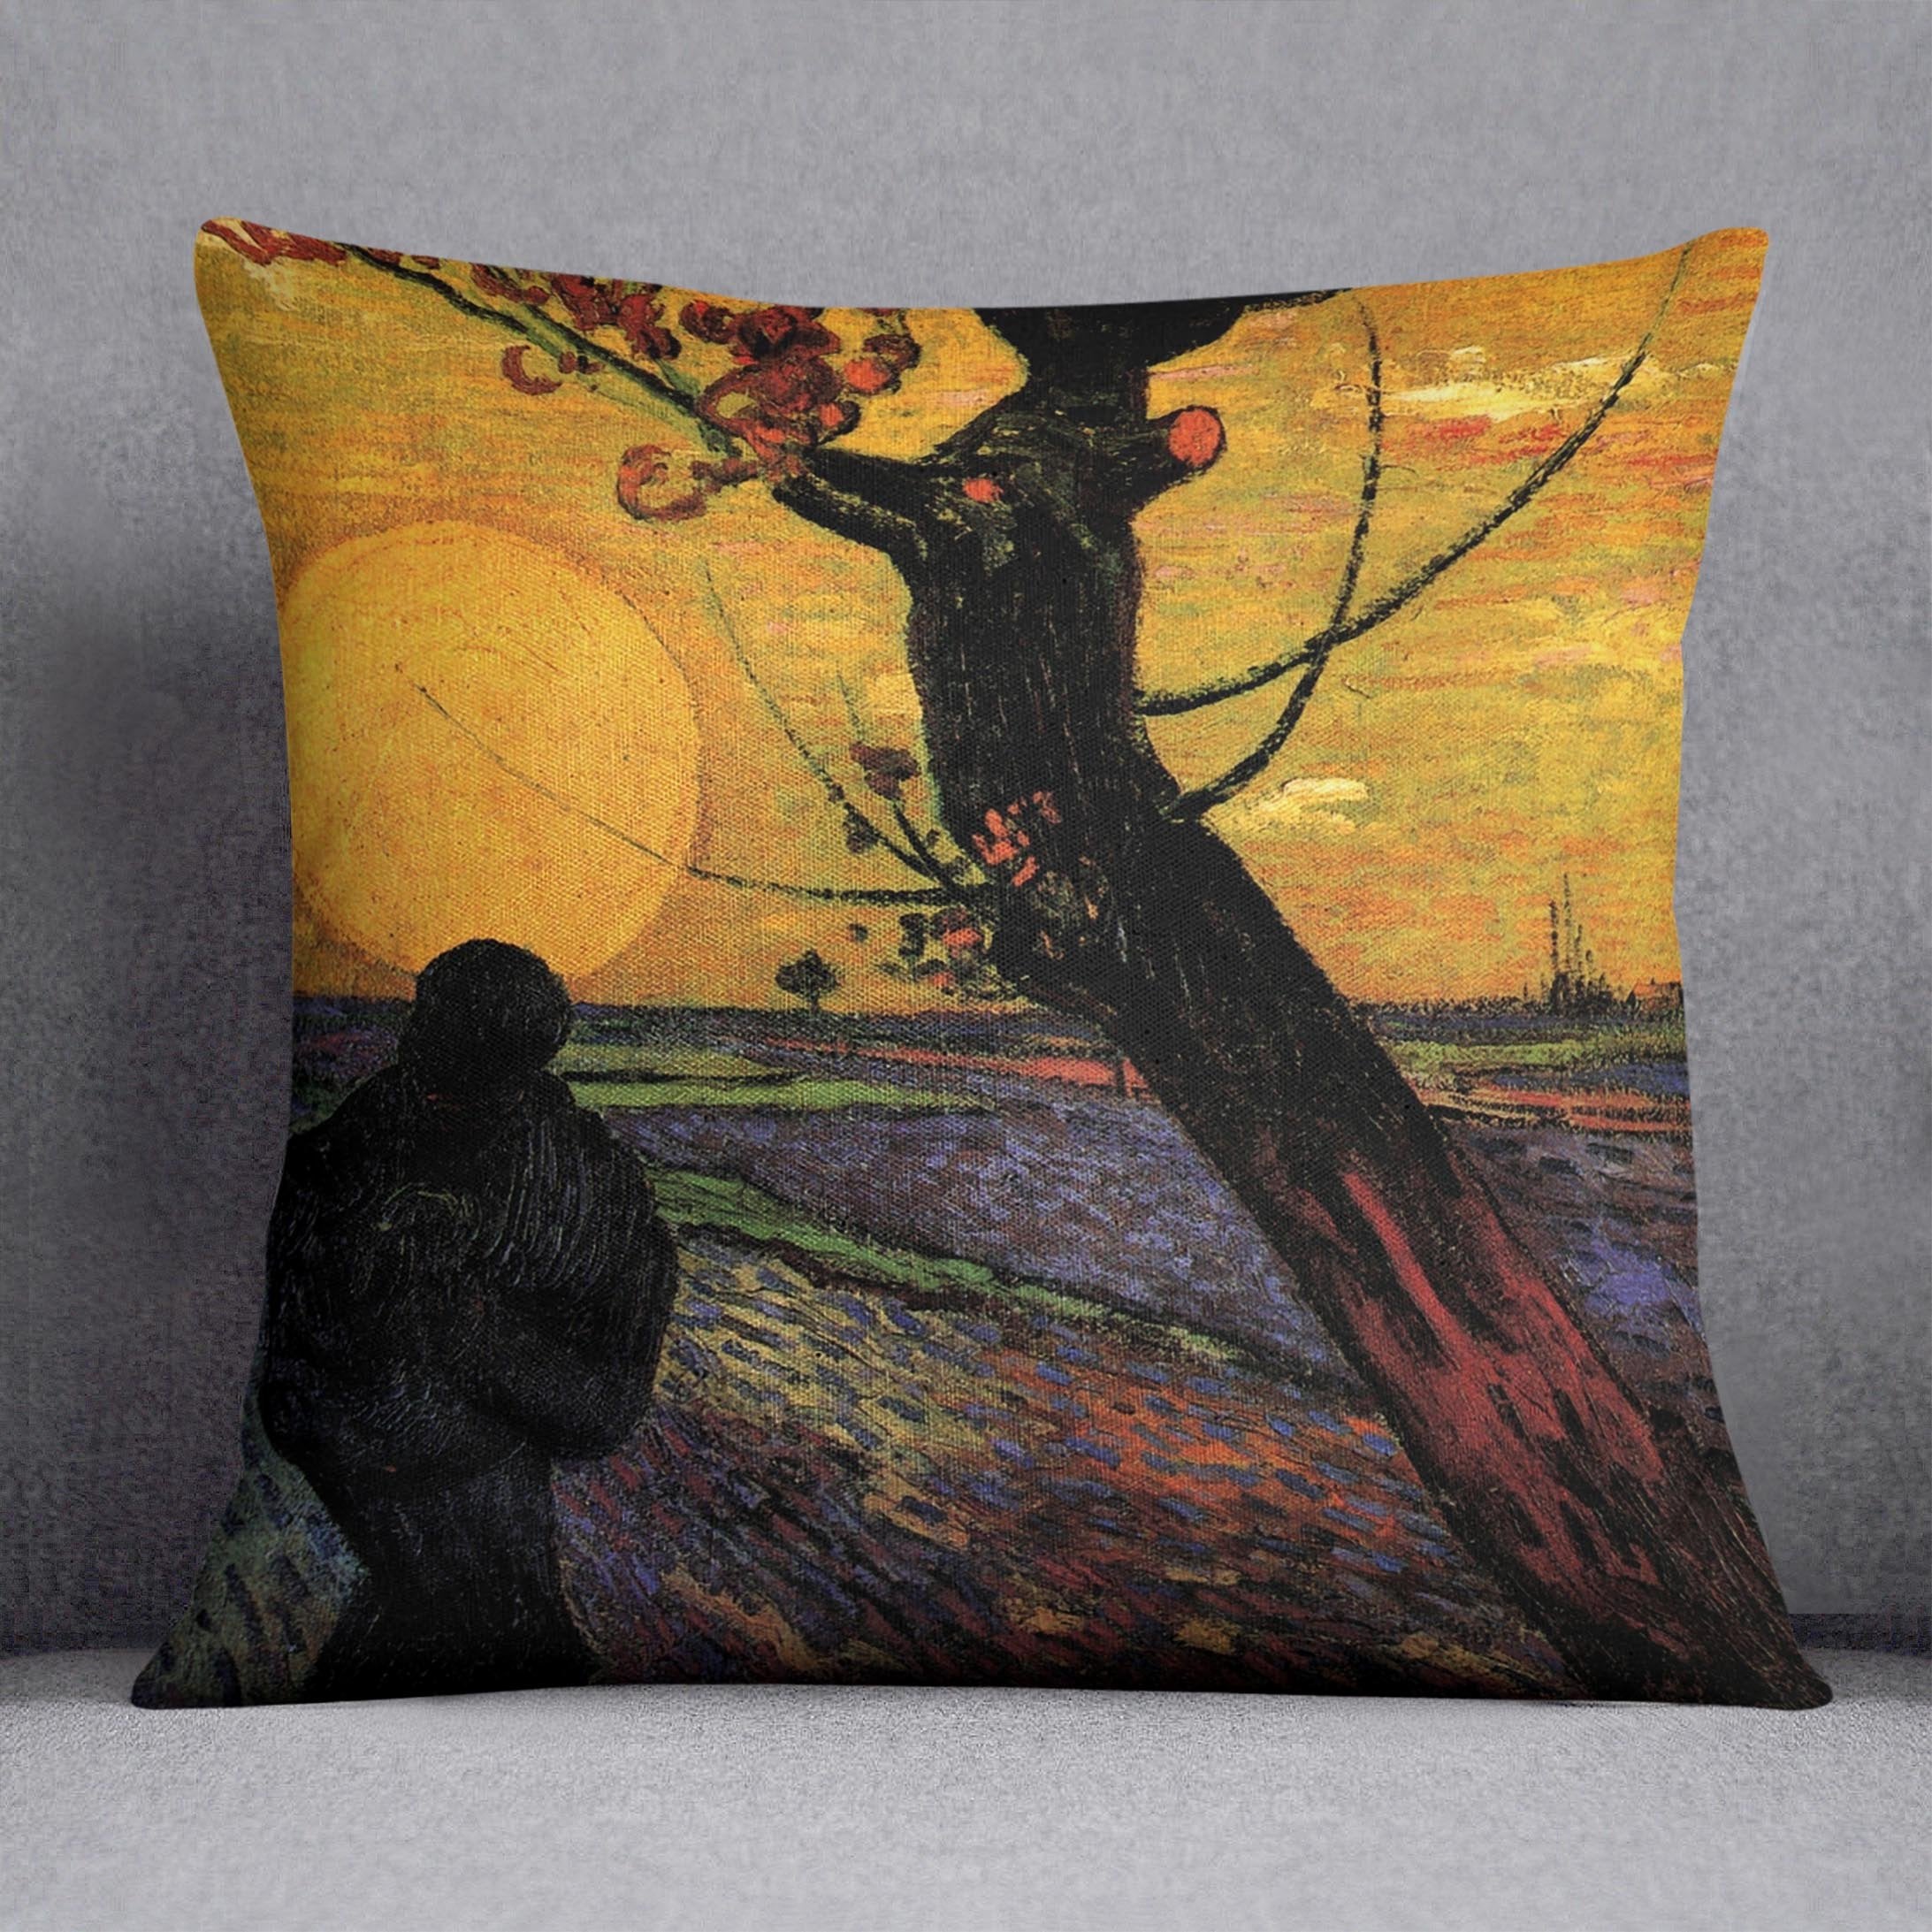 The Sower 2 by Van Gogh Throw Pillow